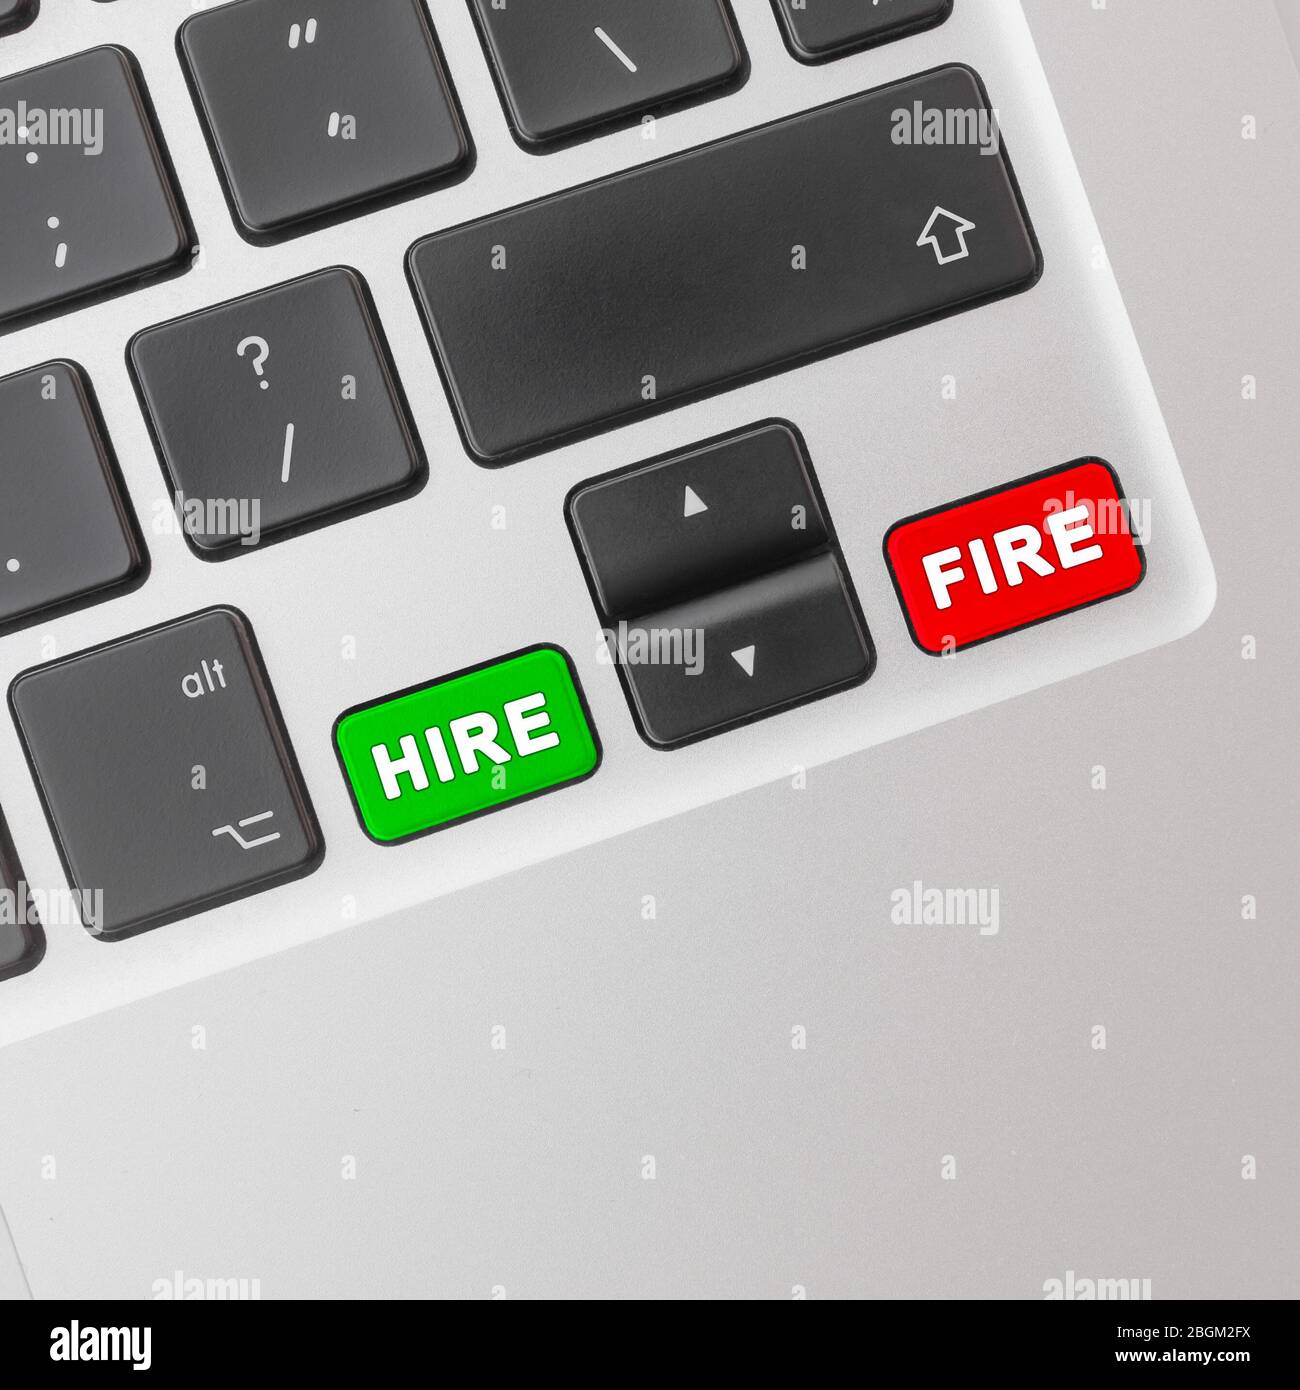 HIRE and FIRE buttons on computer keyboard. Stock Photo